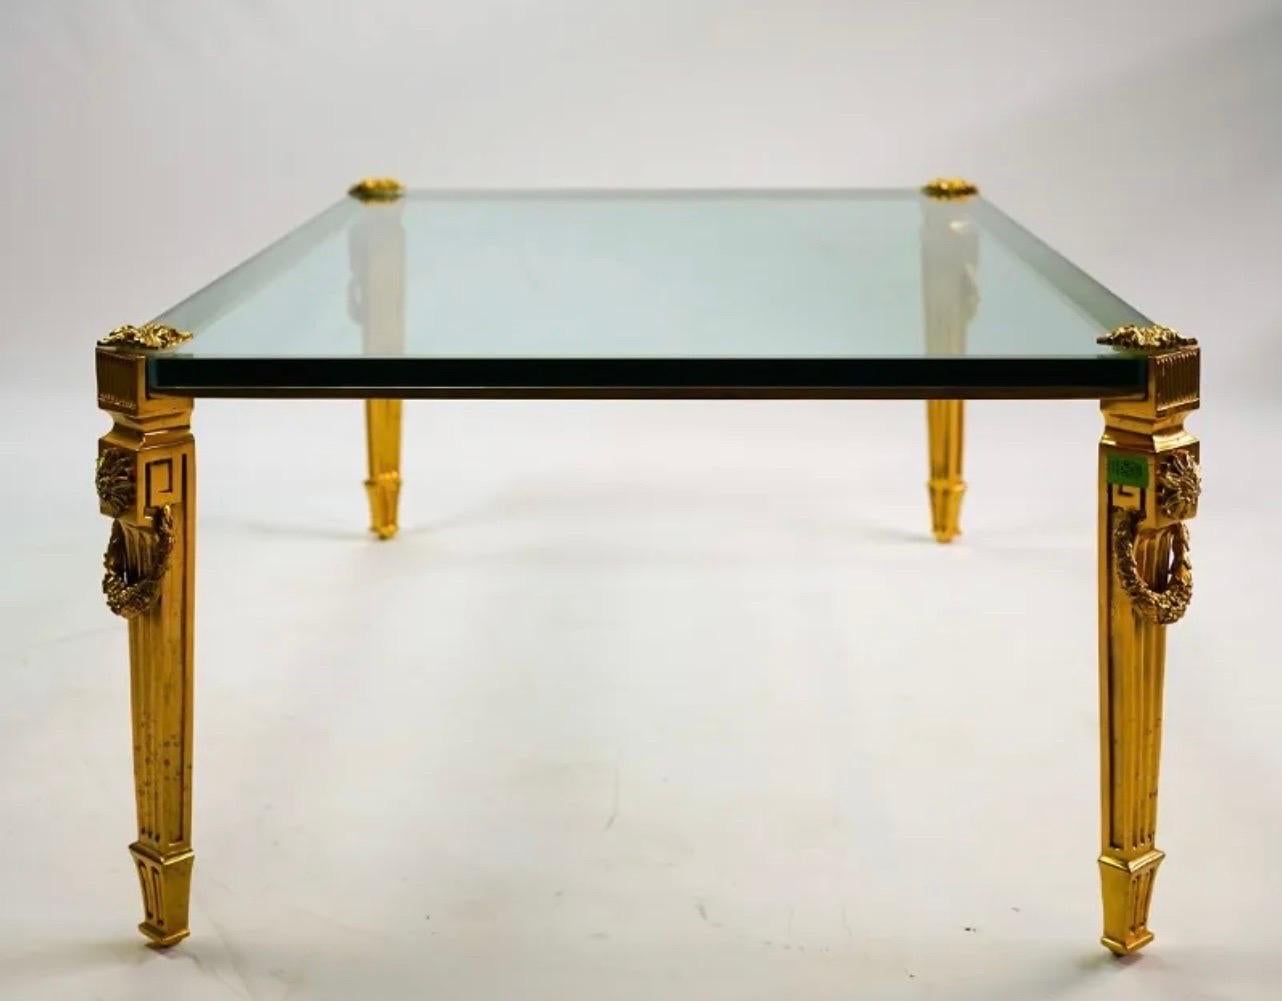 A fine gilt bronze P.E. Guerin Louis XVI style with ormolu garlands & rosettes over fluted legs glass top coffee / cocktail table